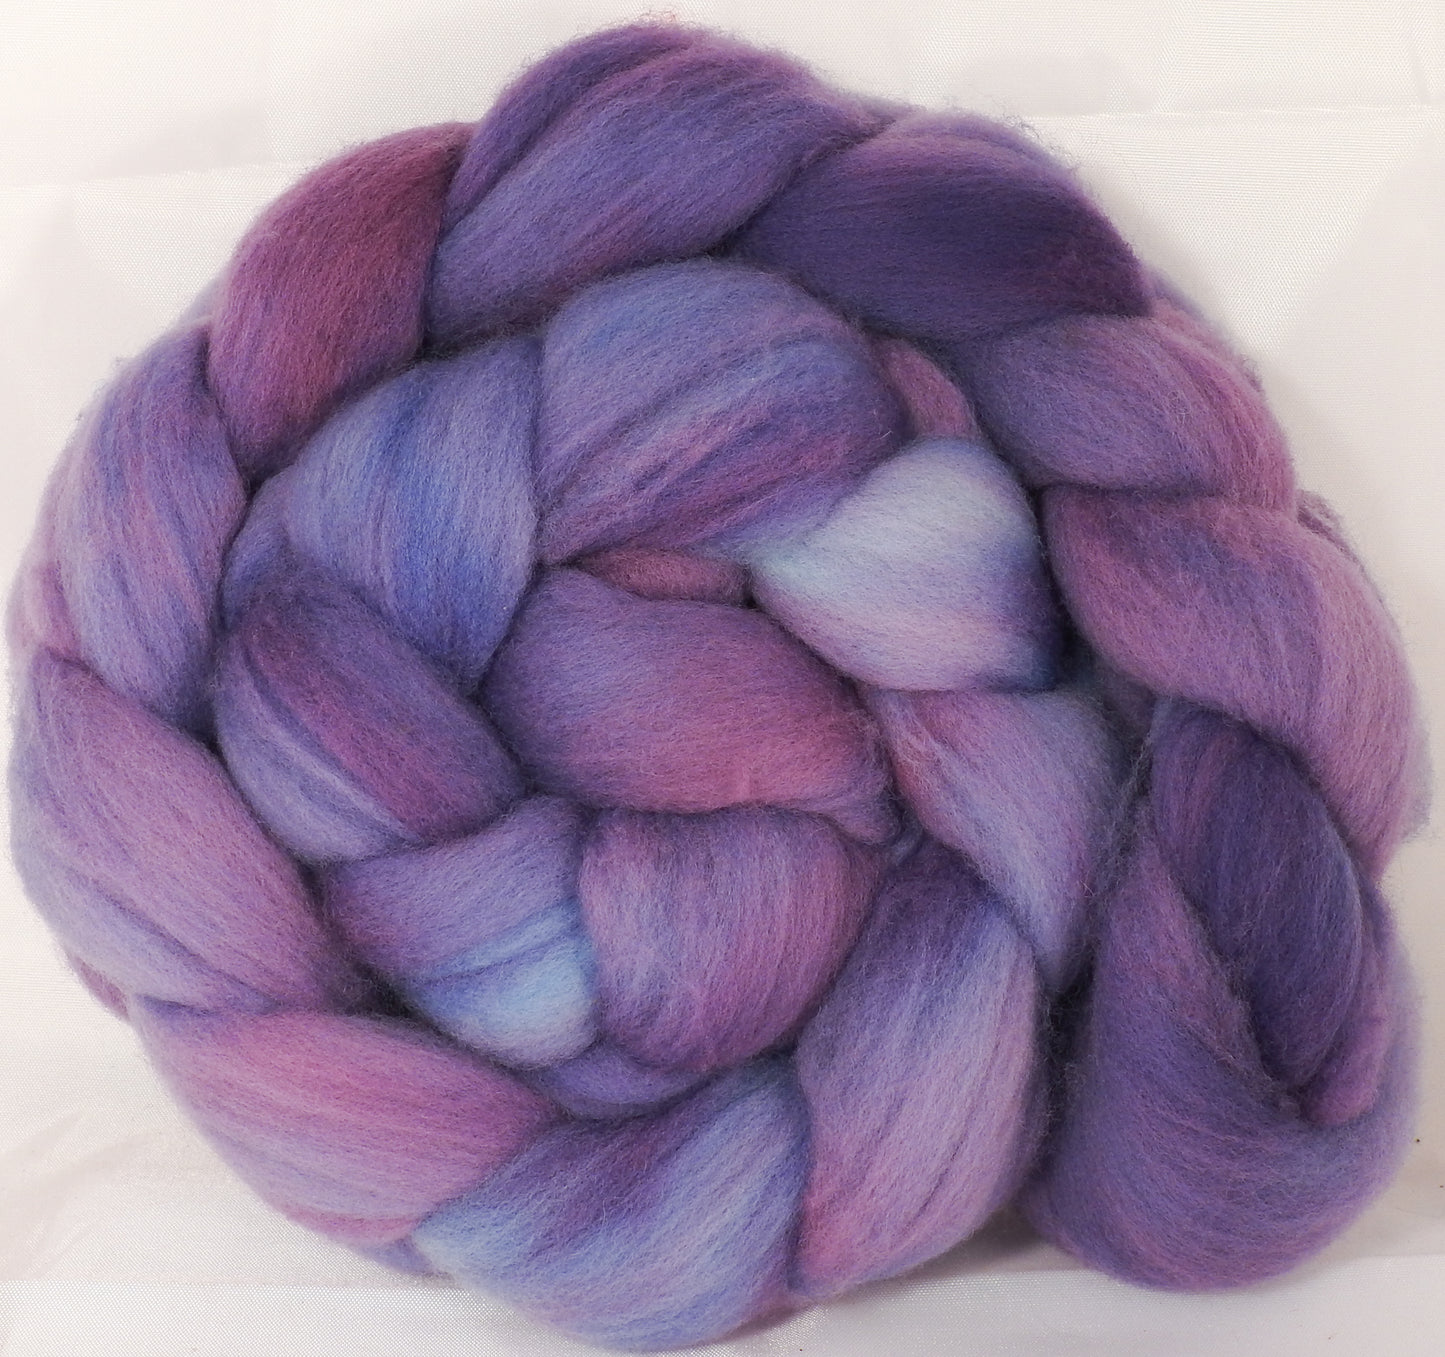 Hand dyed top for spinning -Periwinkle - (5.5 oz.) Organic polwarth - Inglenook Fibers